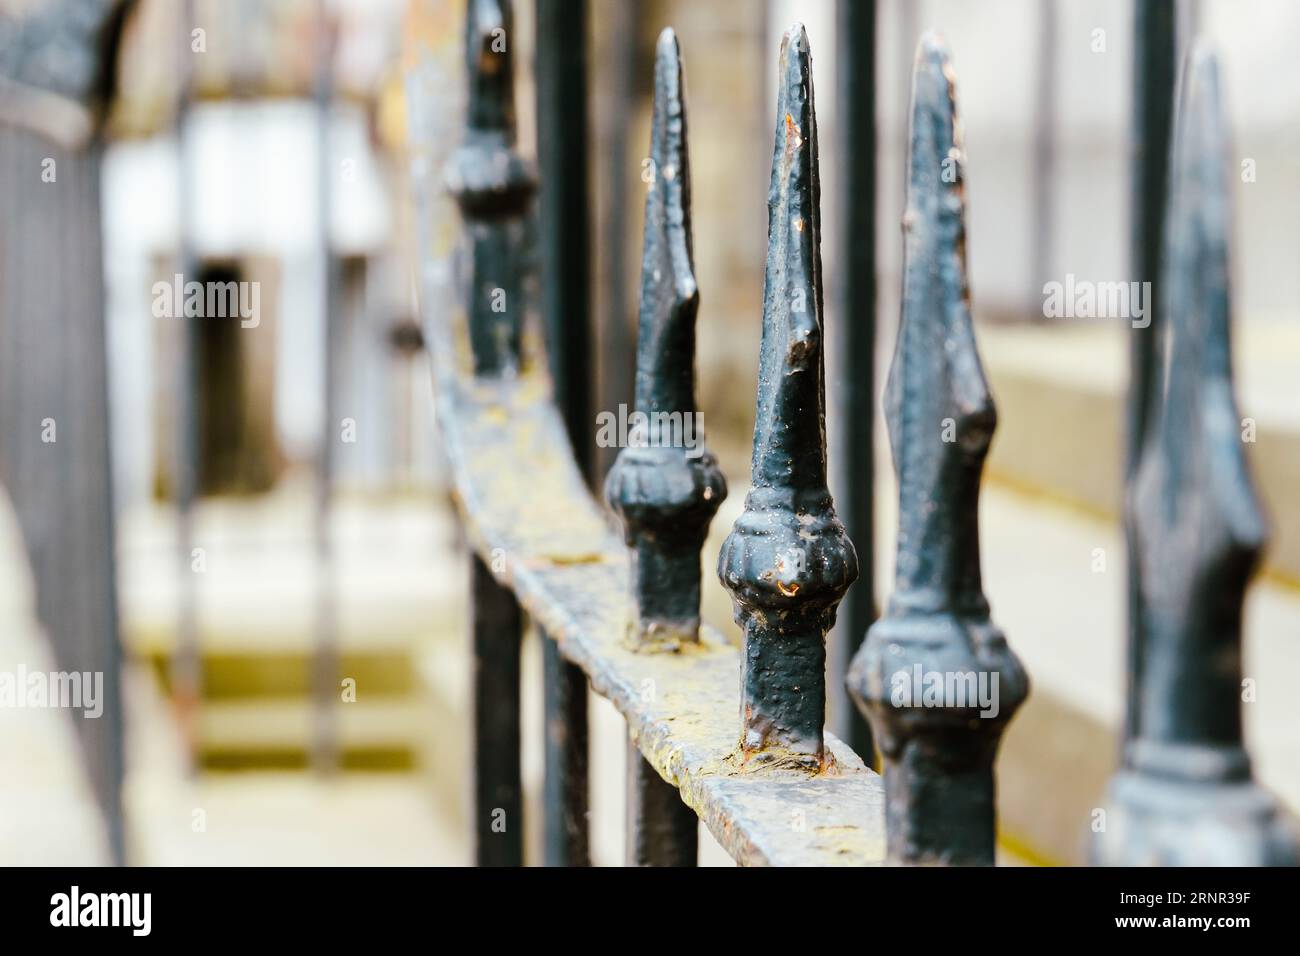 Detail of the decorative gate on the exterior of a house in Edinburgh. Selective focus on one of the wrought iron spear-shaped pieces. Horizontal shot Stock Photo